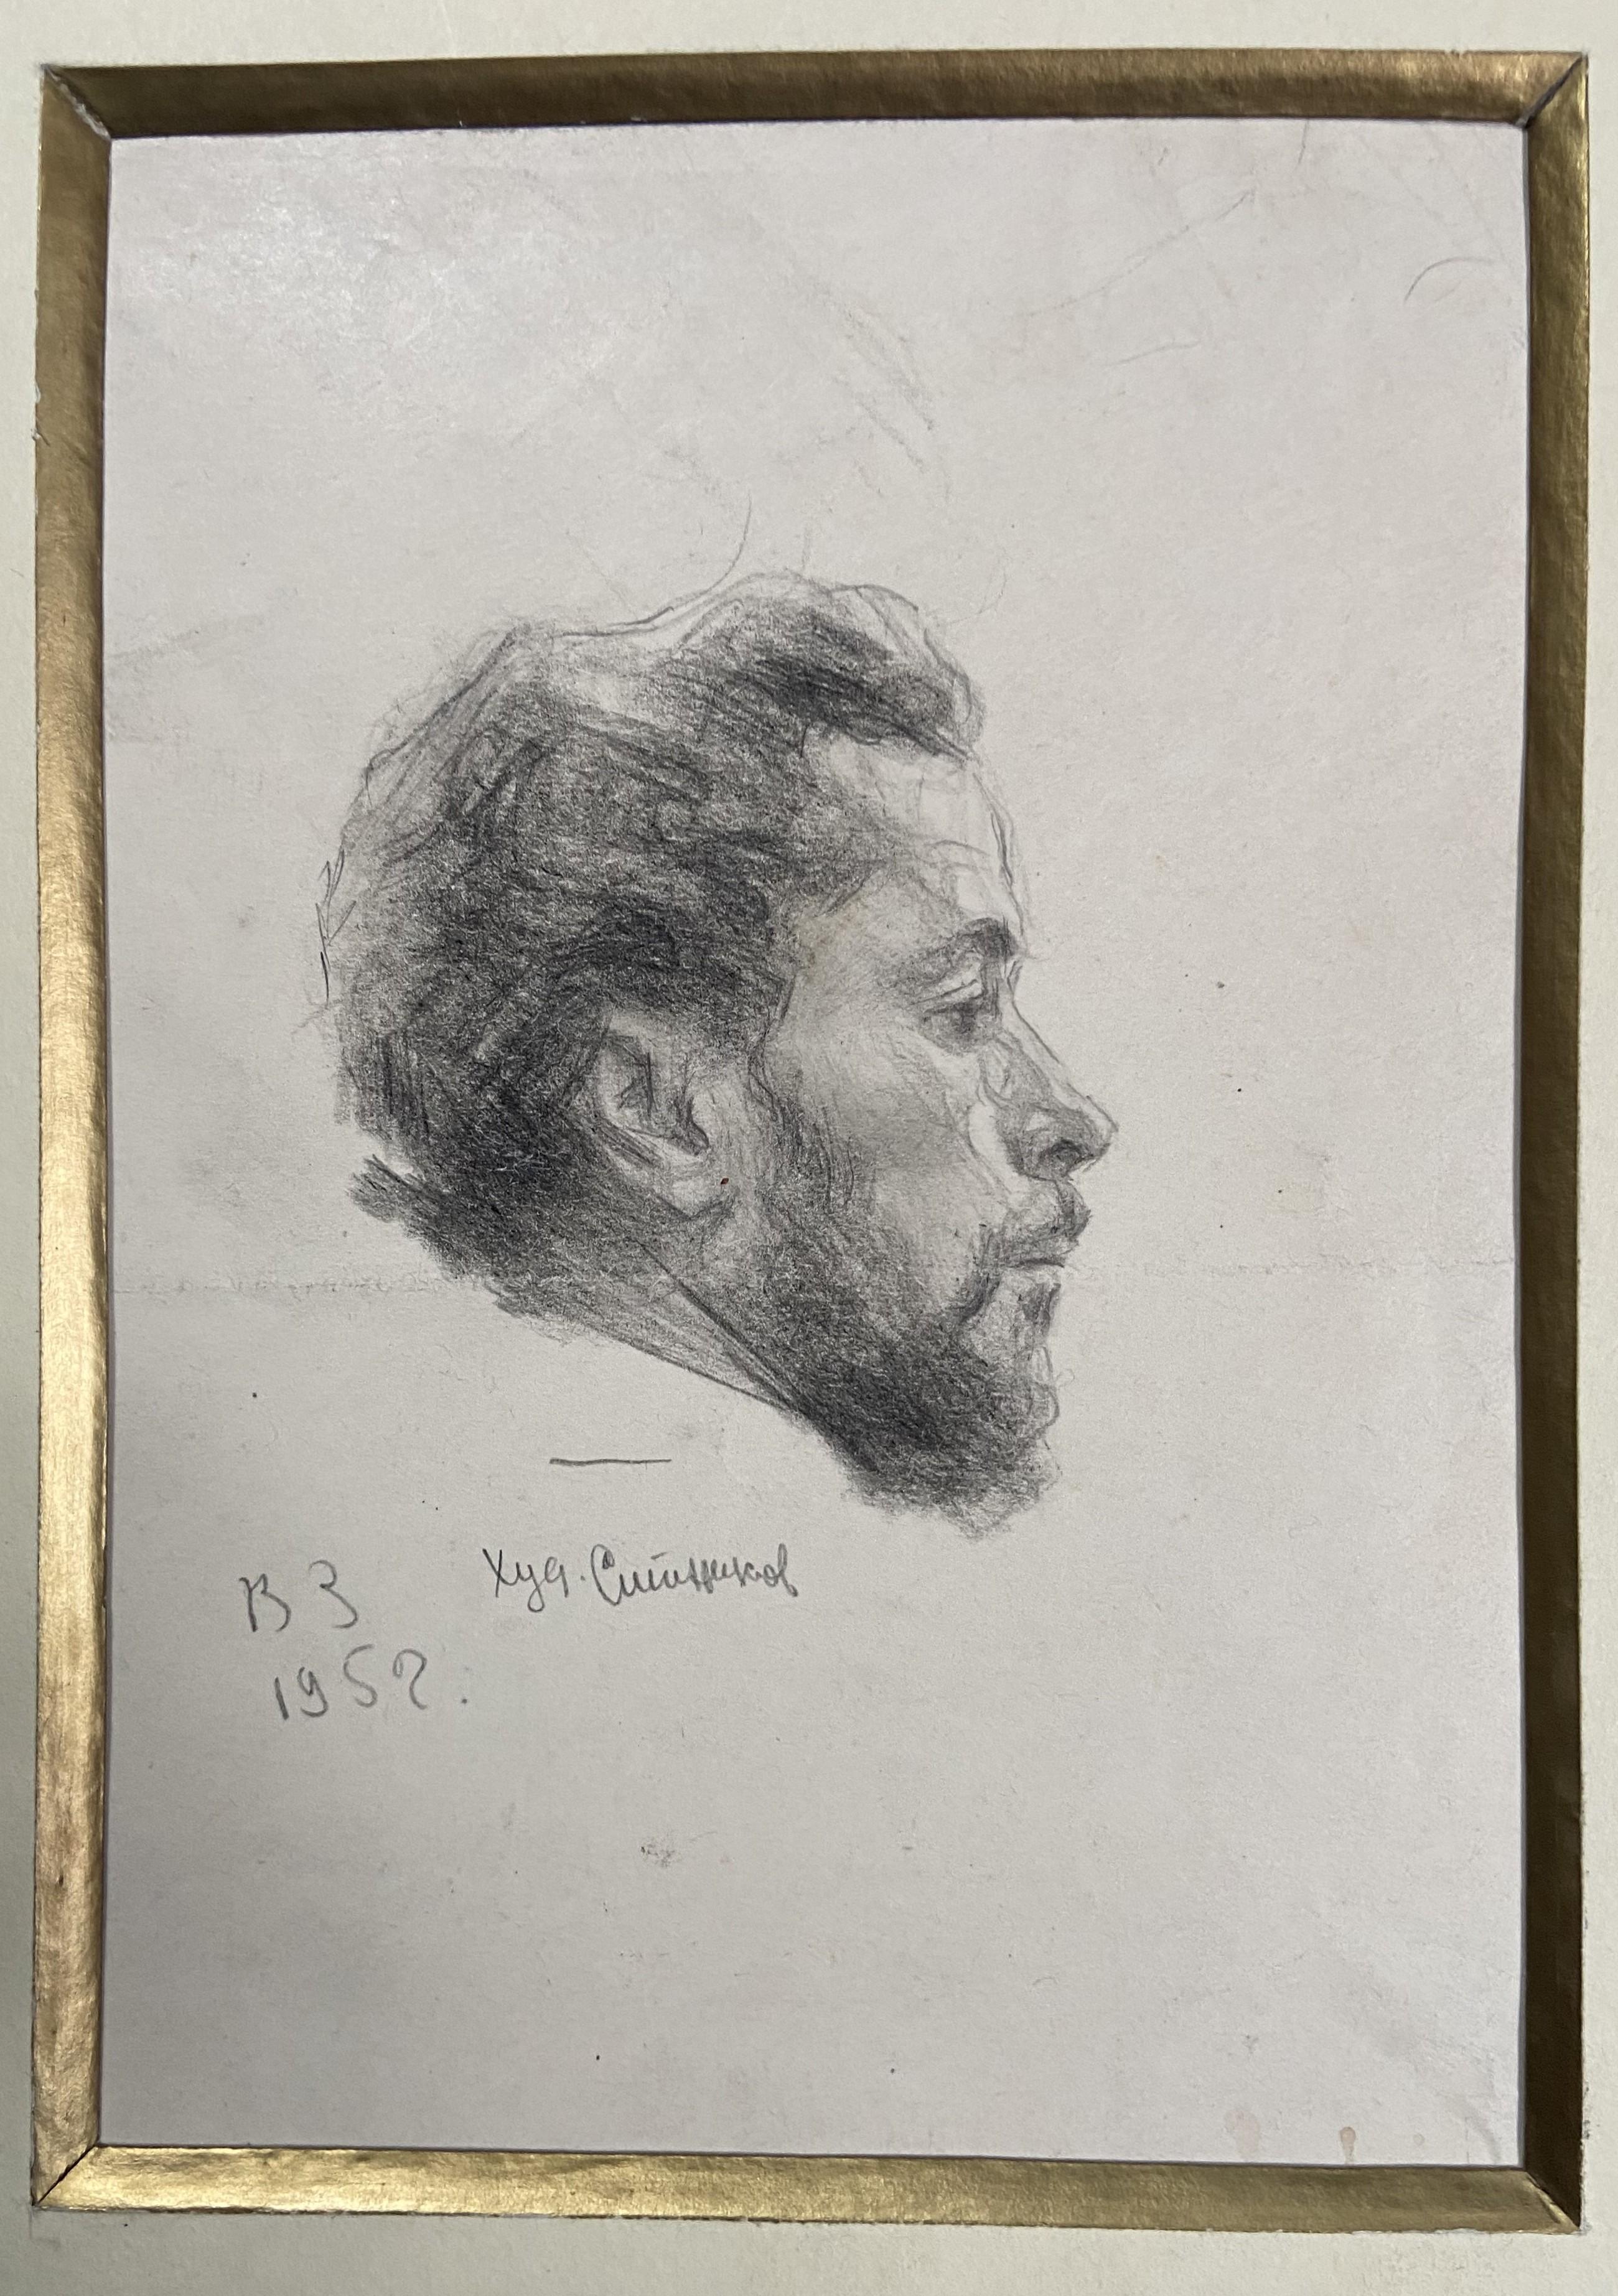 Russian School, 20th Century
Portrait of a man in profile, 1952
dated and annotated lower left
Pencil on paper
16 x 11 cm
In good condition, except a clearly visible fold trace in the middle of the sheet (see photographs please)
In a modern frame : 